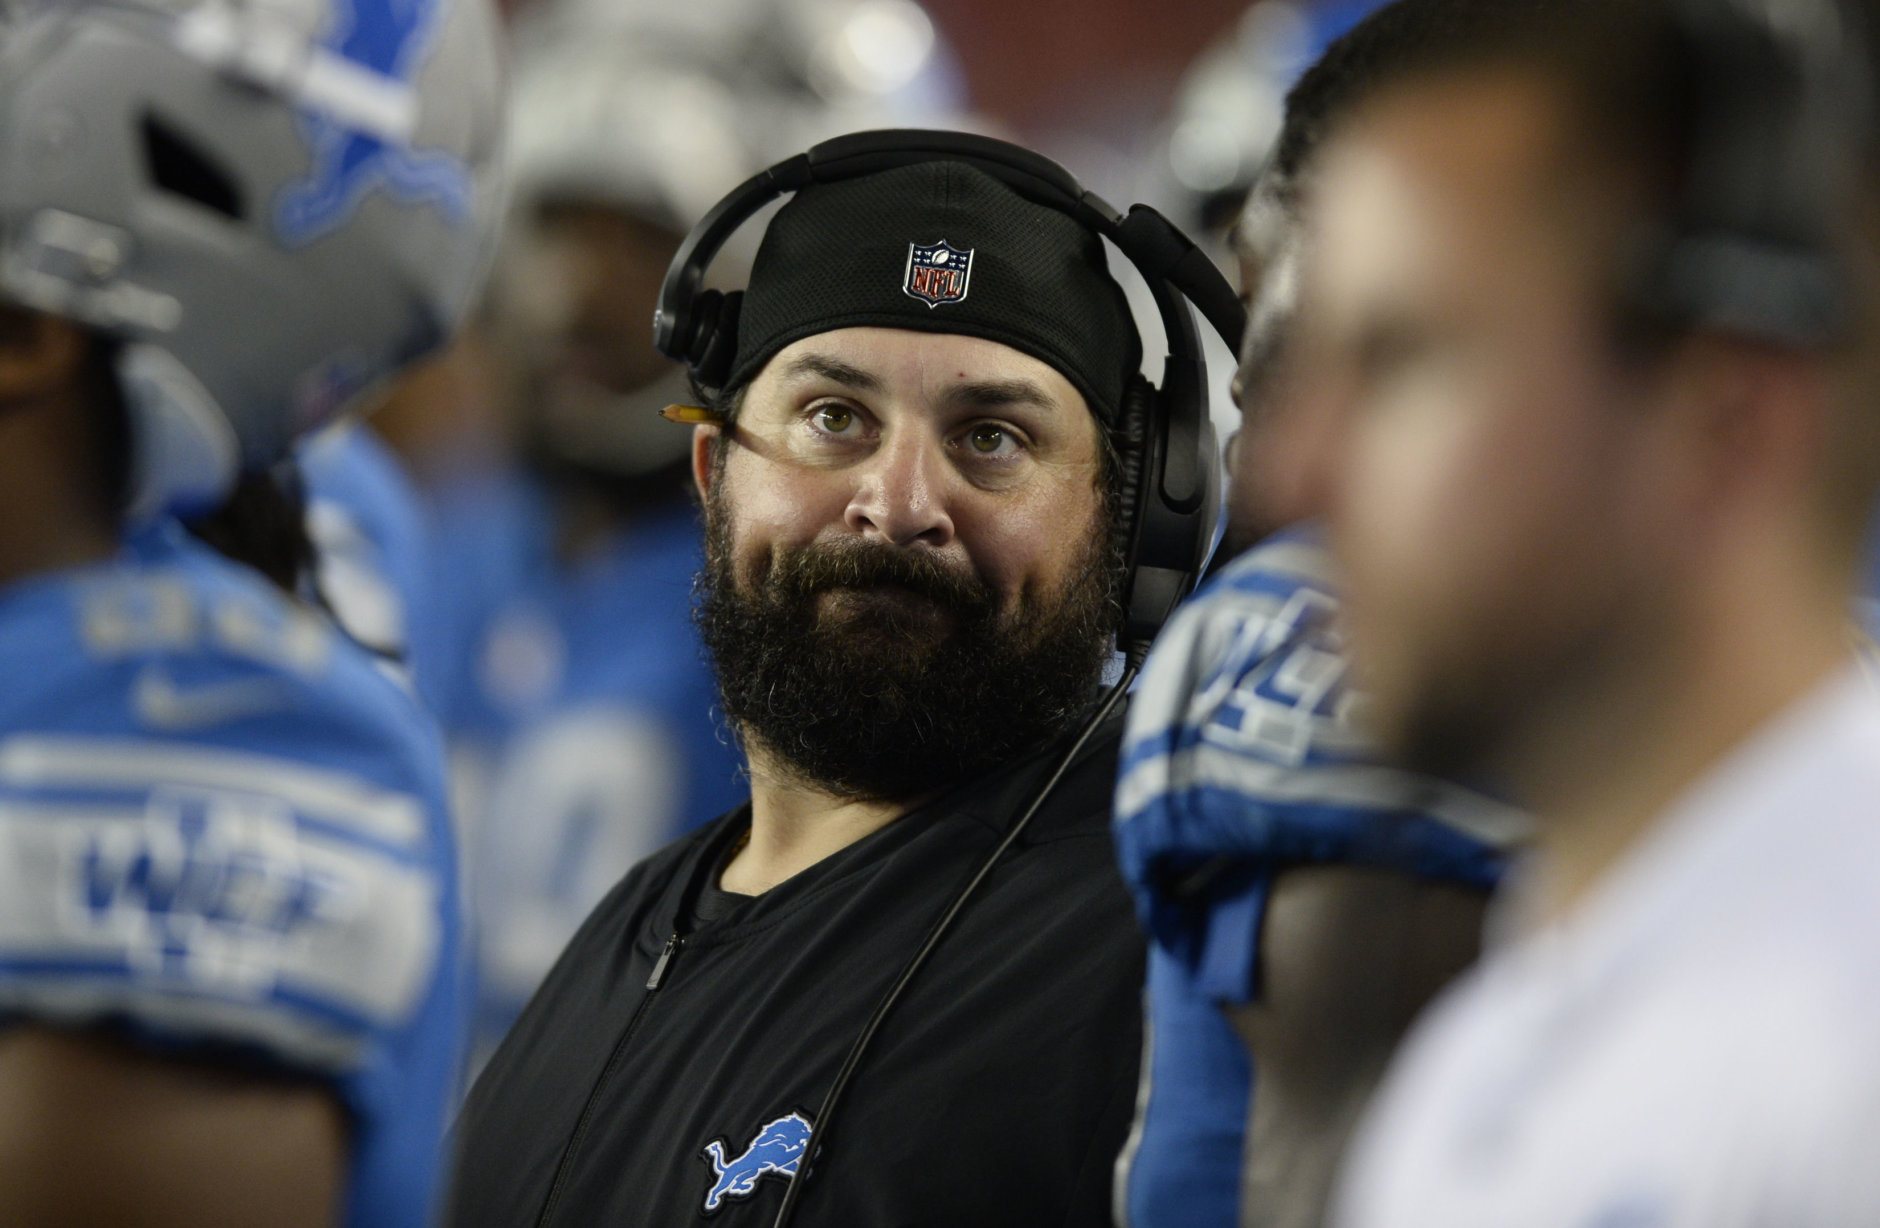 Detroit Lions head coach Matt Patricia during the second half of an NFL preseason football game against the Tampa Bay Buccaneers Friday, Aug. 24, 2018, in Tampa, Fla. (AP Photo/Jason Behnken)